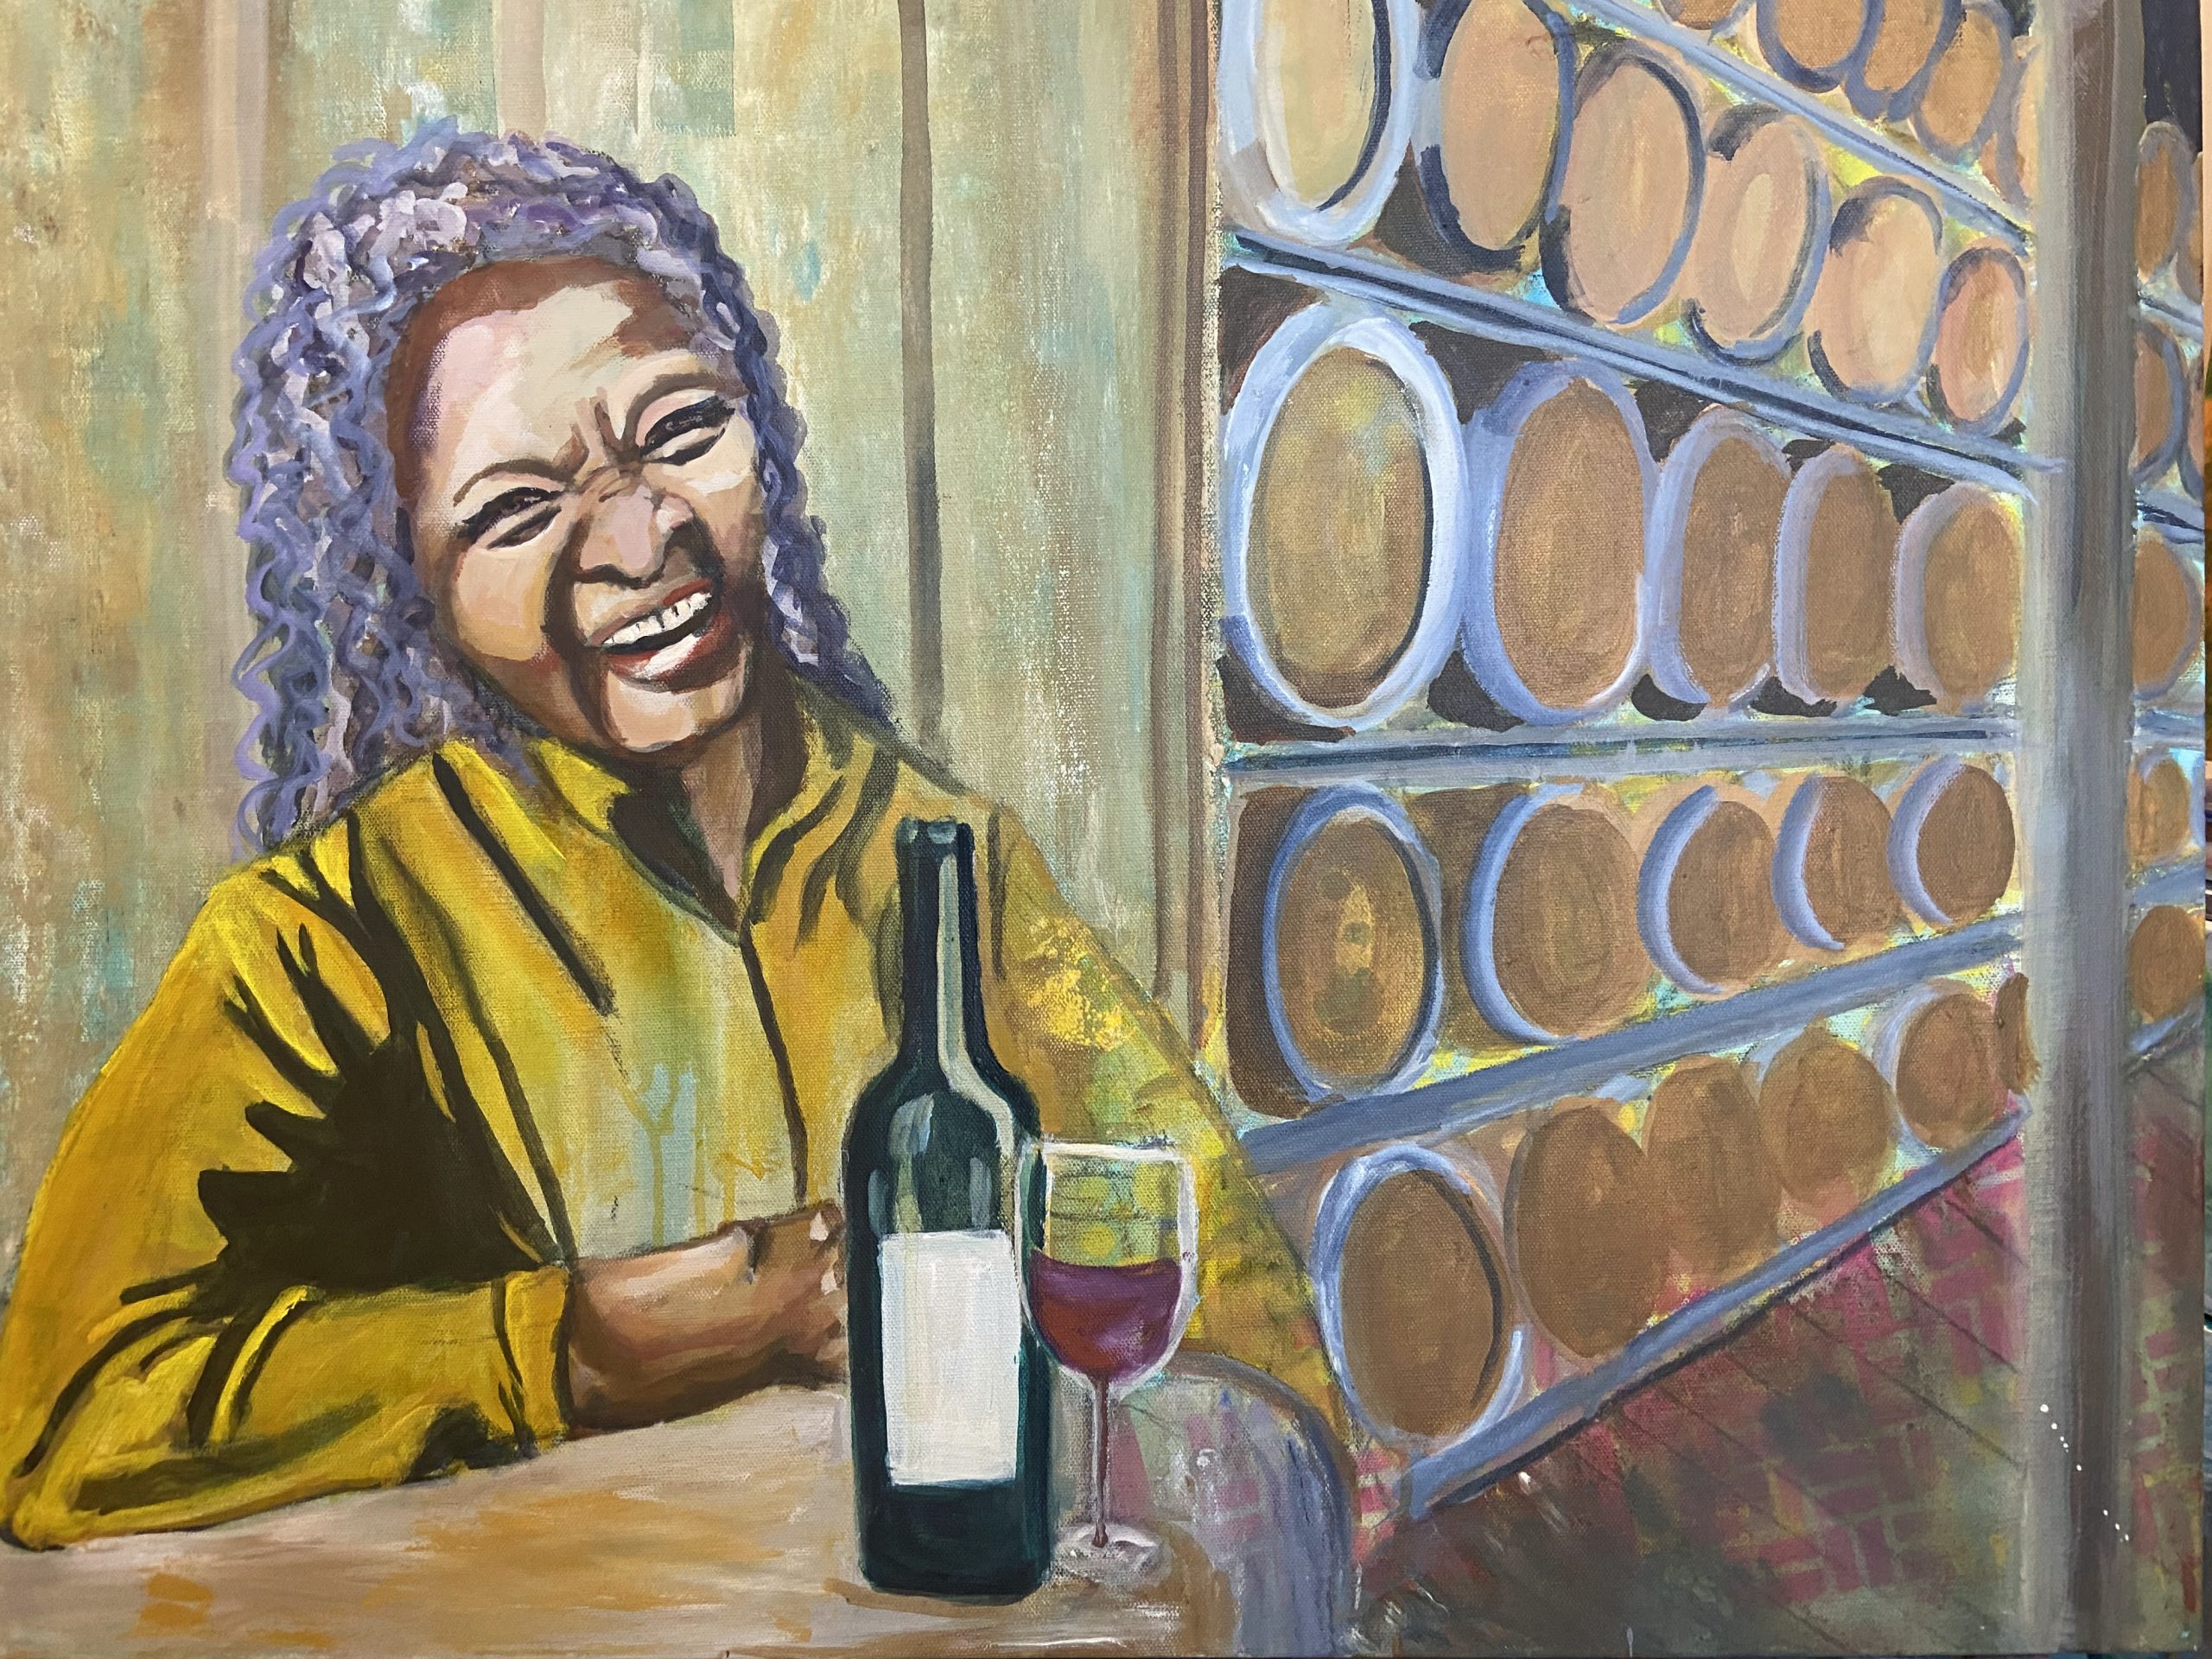 Fourth layer of the painting titled "Barrels of Fun" showing layers of color on the woman's shirt, the bottle of wine and glass, and the wine barrels. 